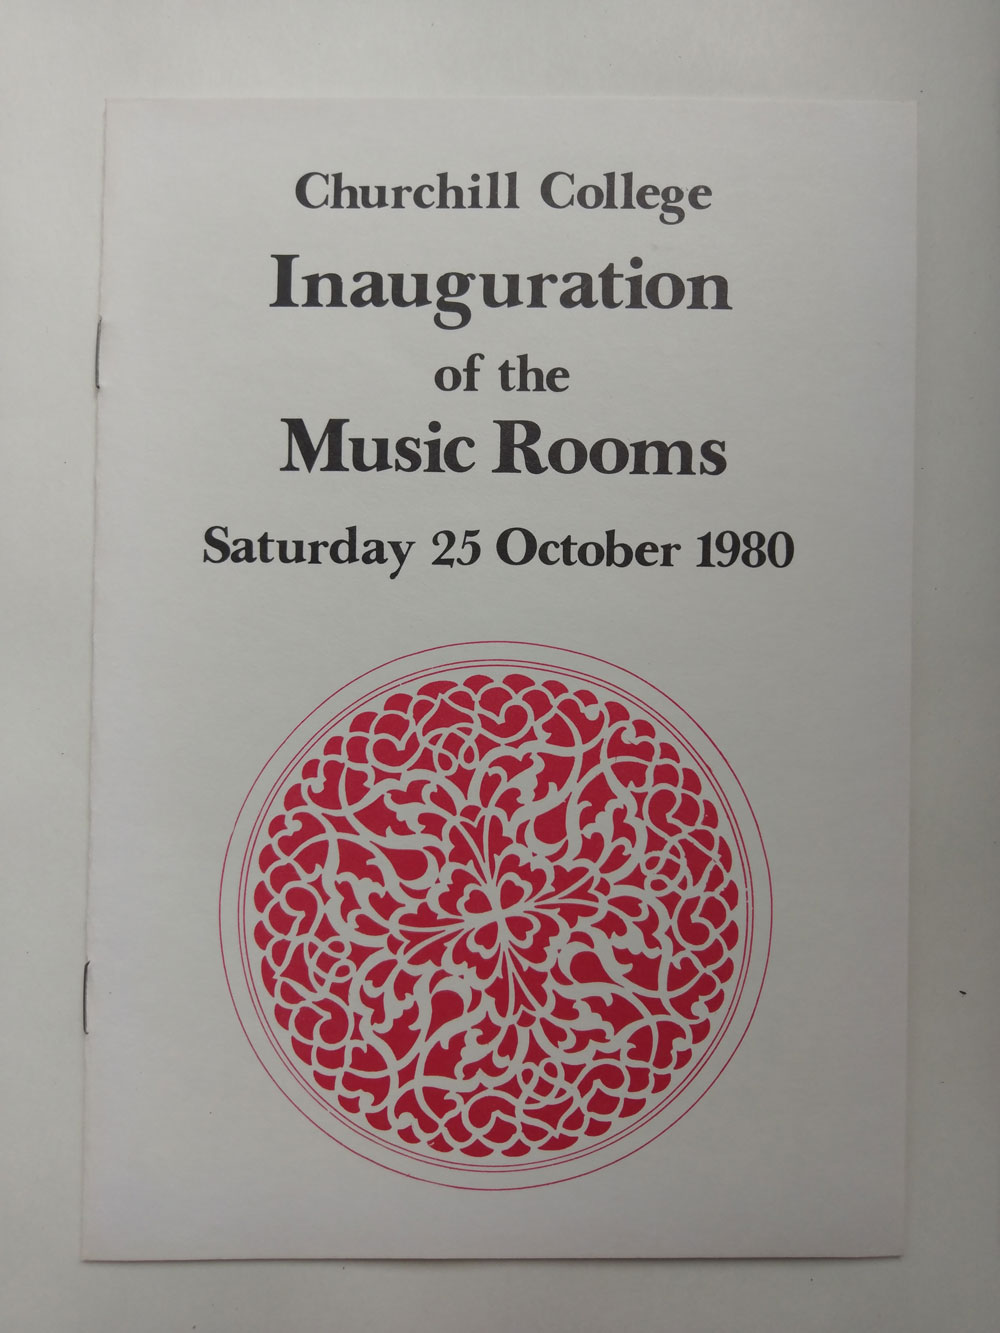 Cover of programme for opening of the Music Rooms